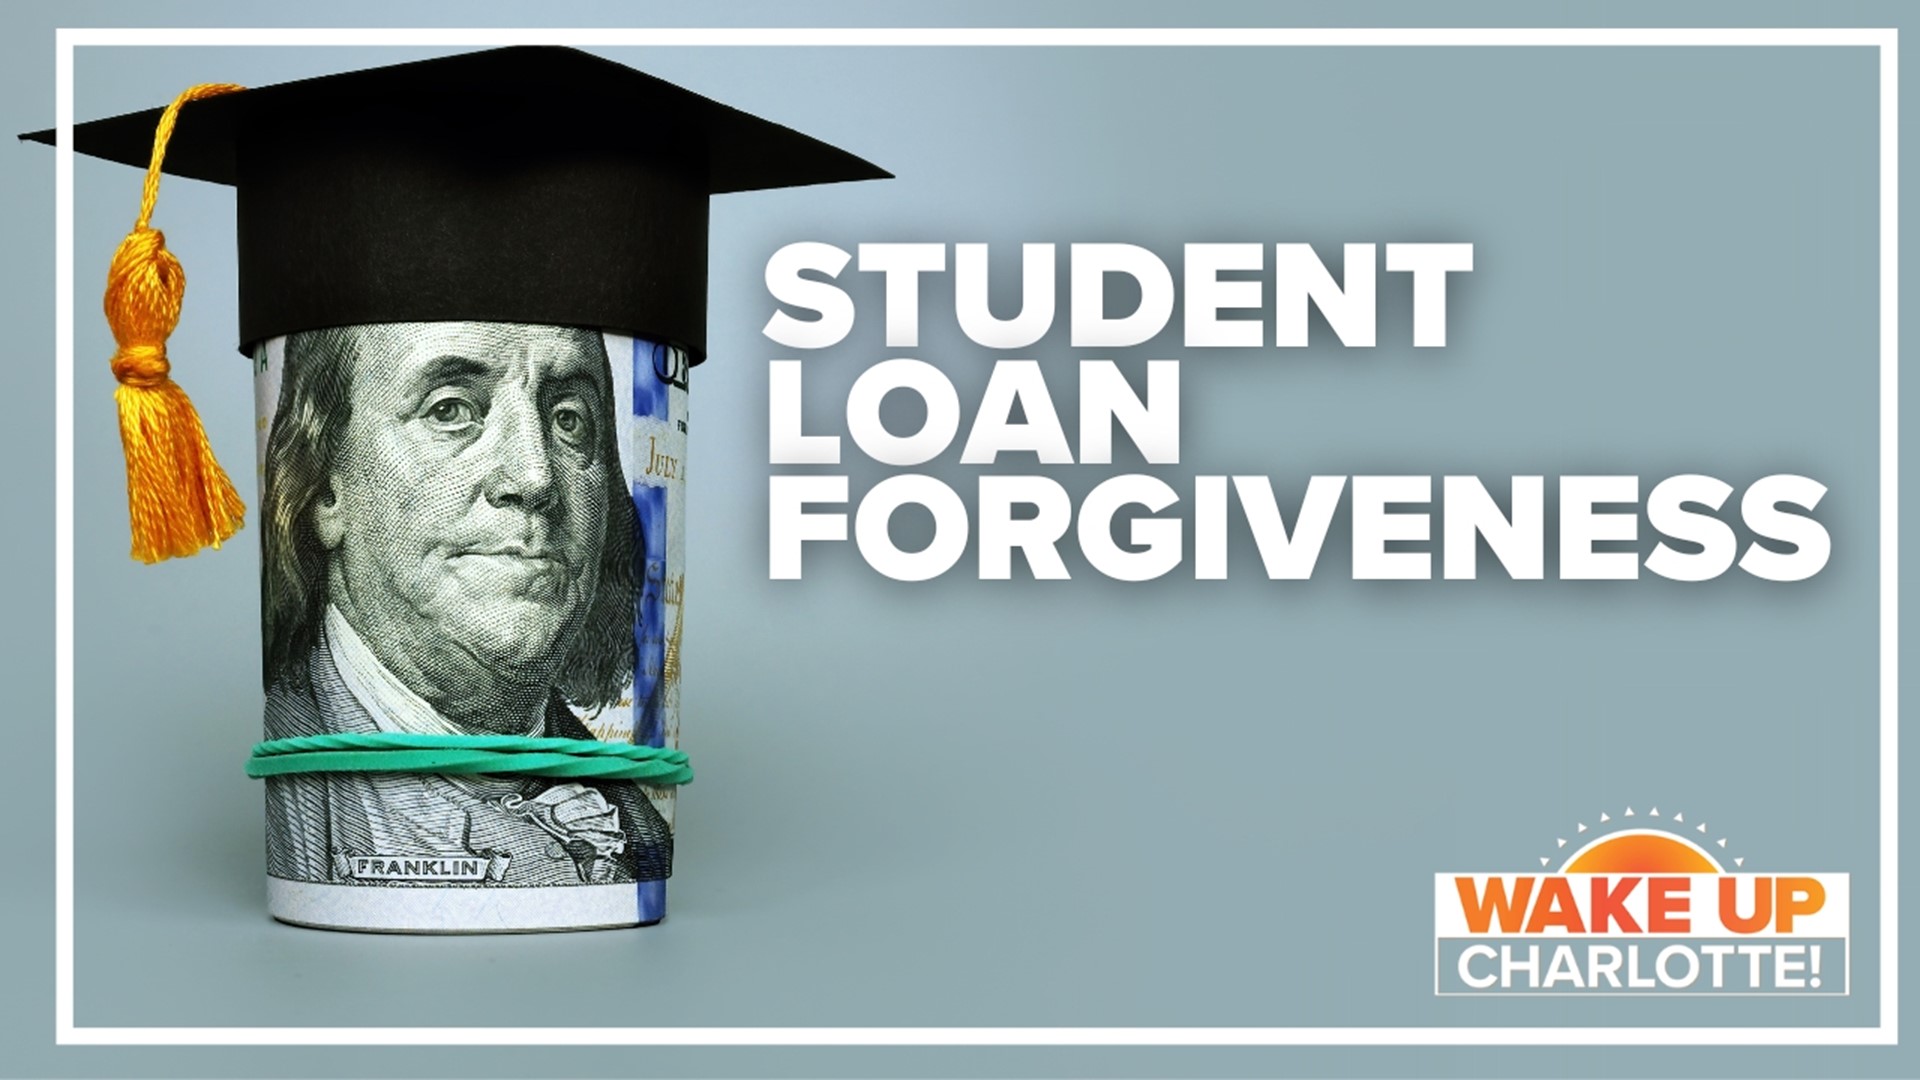 The U.S. Department of Education could have their application for student loan forgiveness up in the next few weeks.